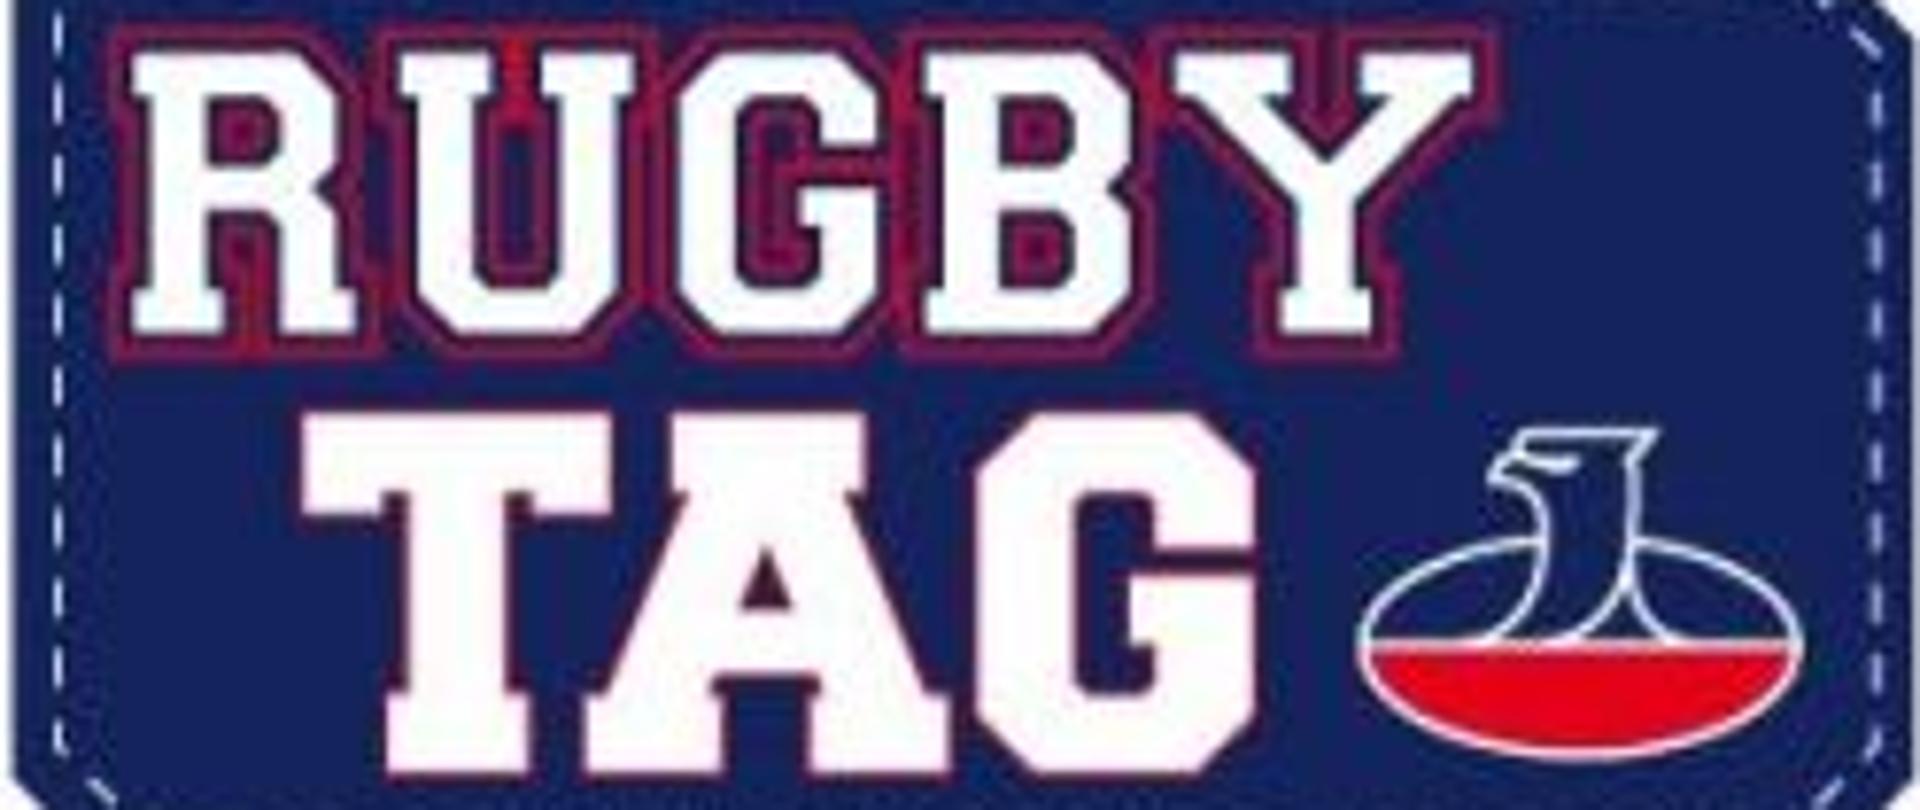 Rugby Tag